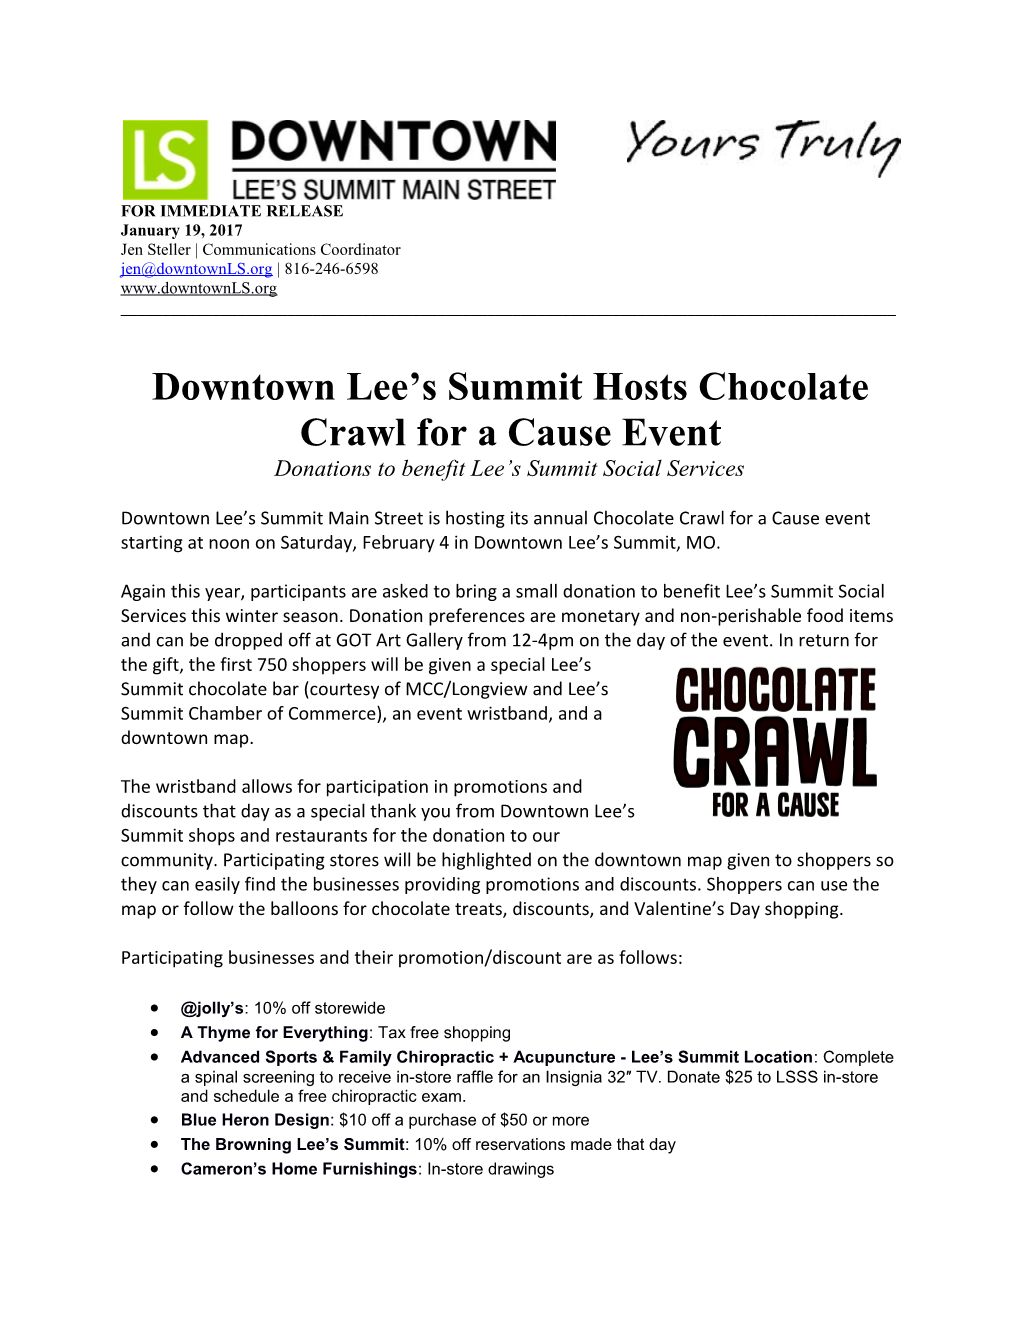 Downtown Lee S Summit Hosts Chocolate Crawl for a Cause Event